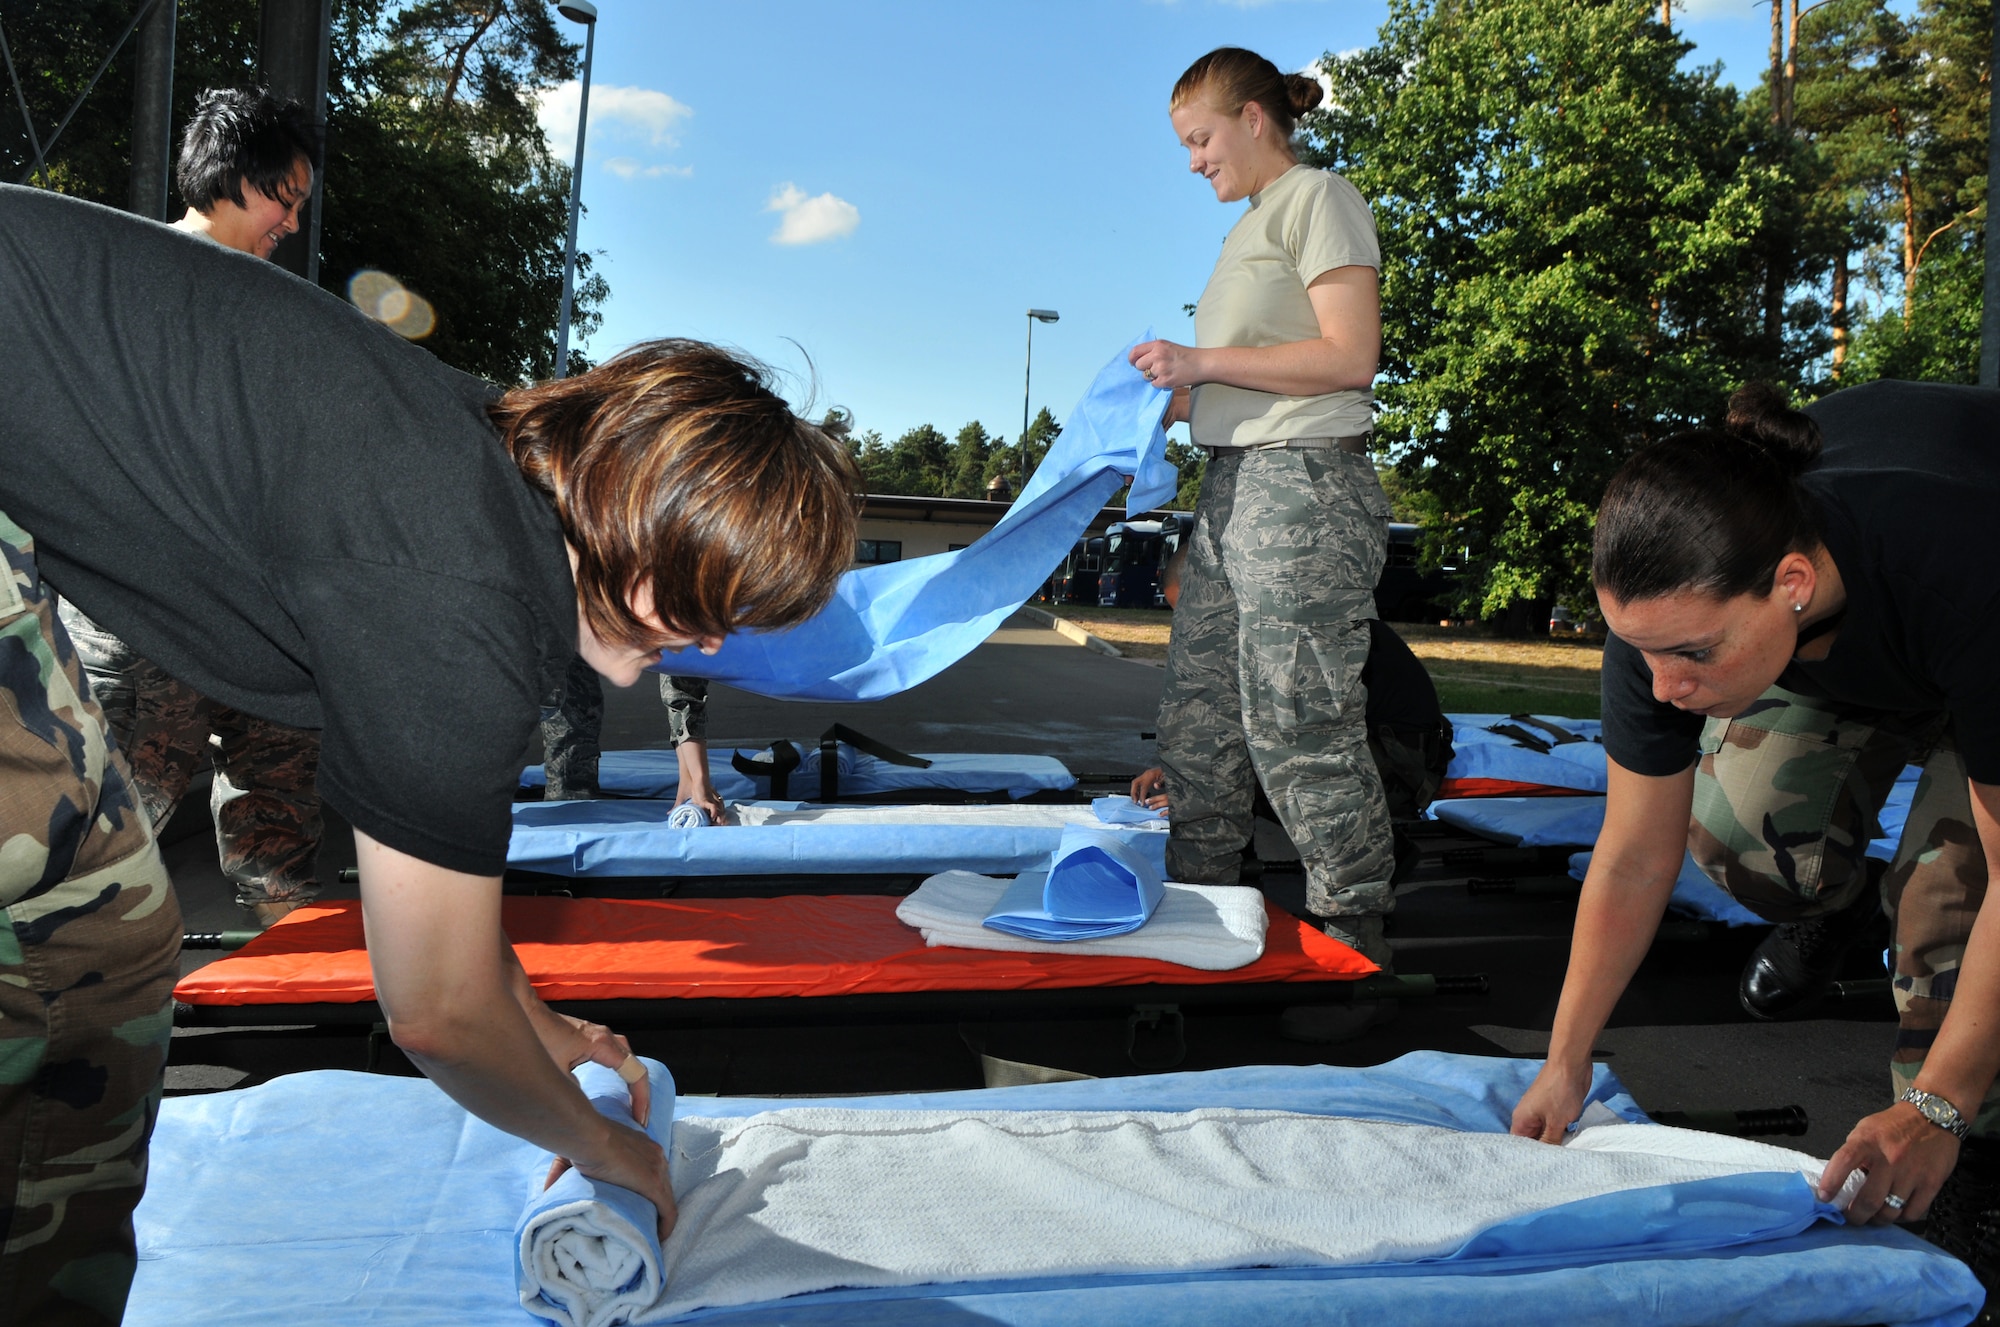 (From left to right starting in the front) U.S. Air Force Tech. Sgt. Christina Werkin, Tech. Sgt. Laura Small, Staff Sgt. Frances Sturdevant, and Senior Airman Lisa Kennedy, 86th Contingency Aeromedical Staging Facility medical technicians, prepare gurneys, Ramstein Air Base, Germany, Aug. 27, 2009. The gurneys will be used to transport wounded warriors to an aircraft taking them to Walter Reed Army Medical Center for further medical treatment. (U.S. Air Force photo by Senior Airman Nathan Lipscomb)